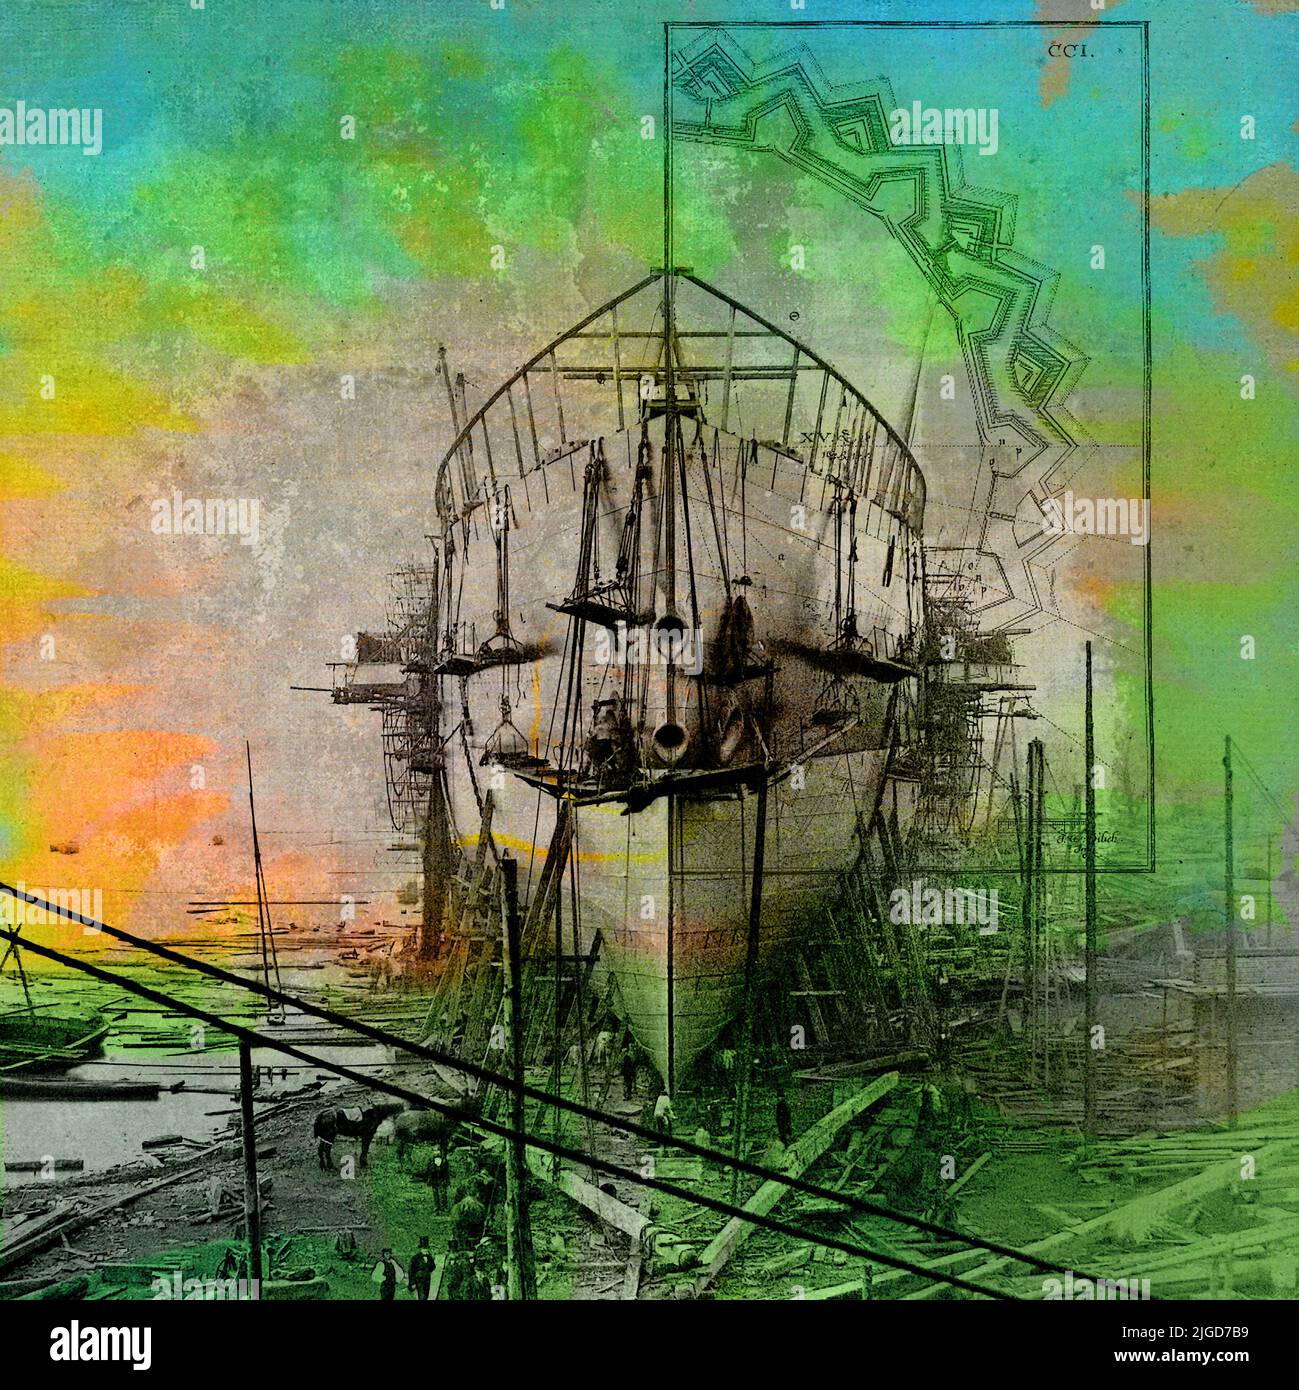 Modern mixed media art collage with an archival photograph of ship building and decorative overlays and color stains. Stock Photo